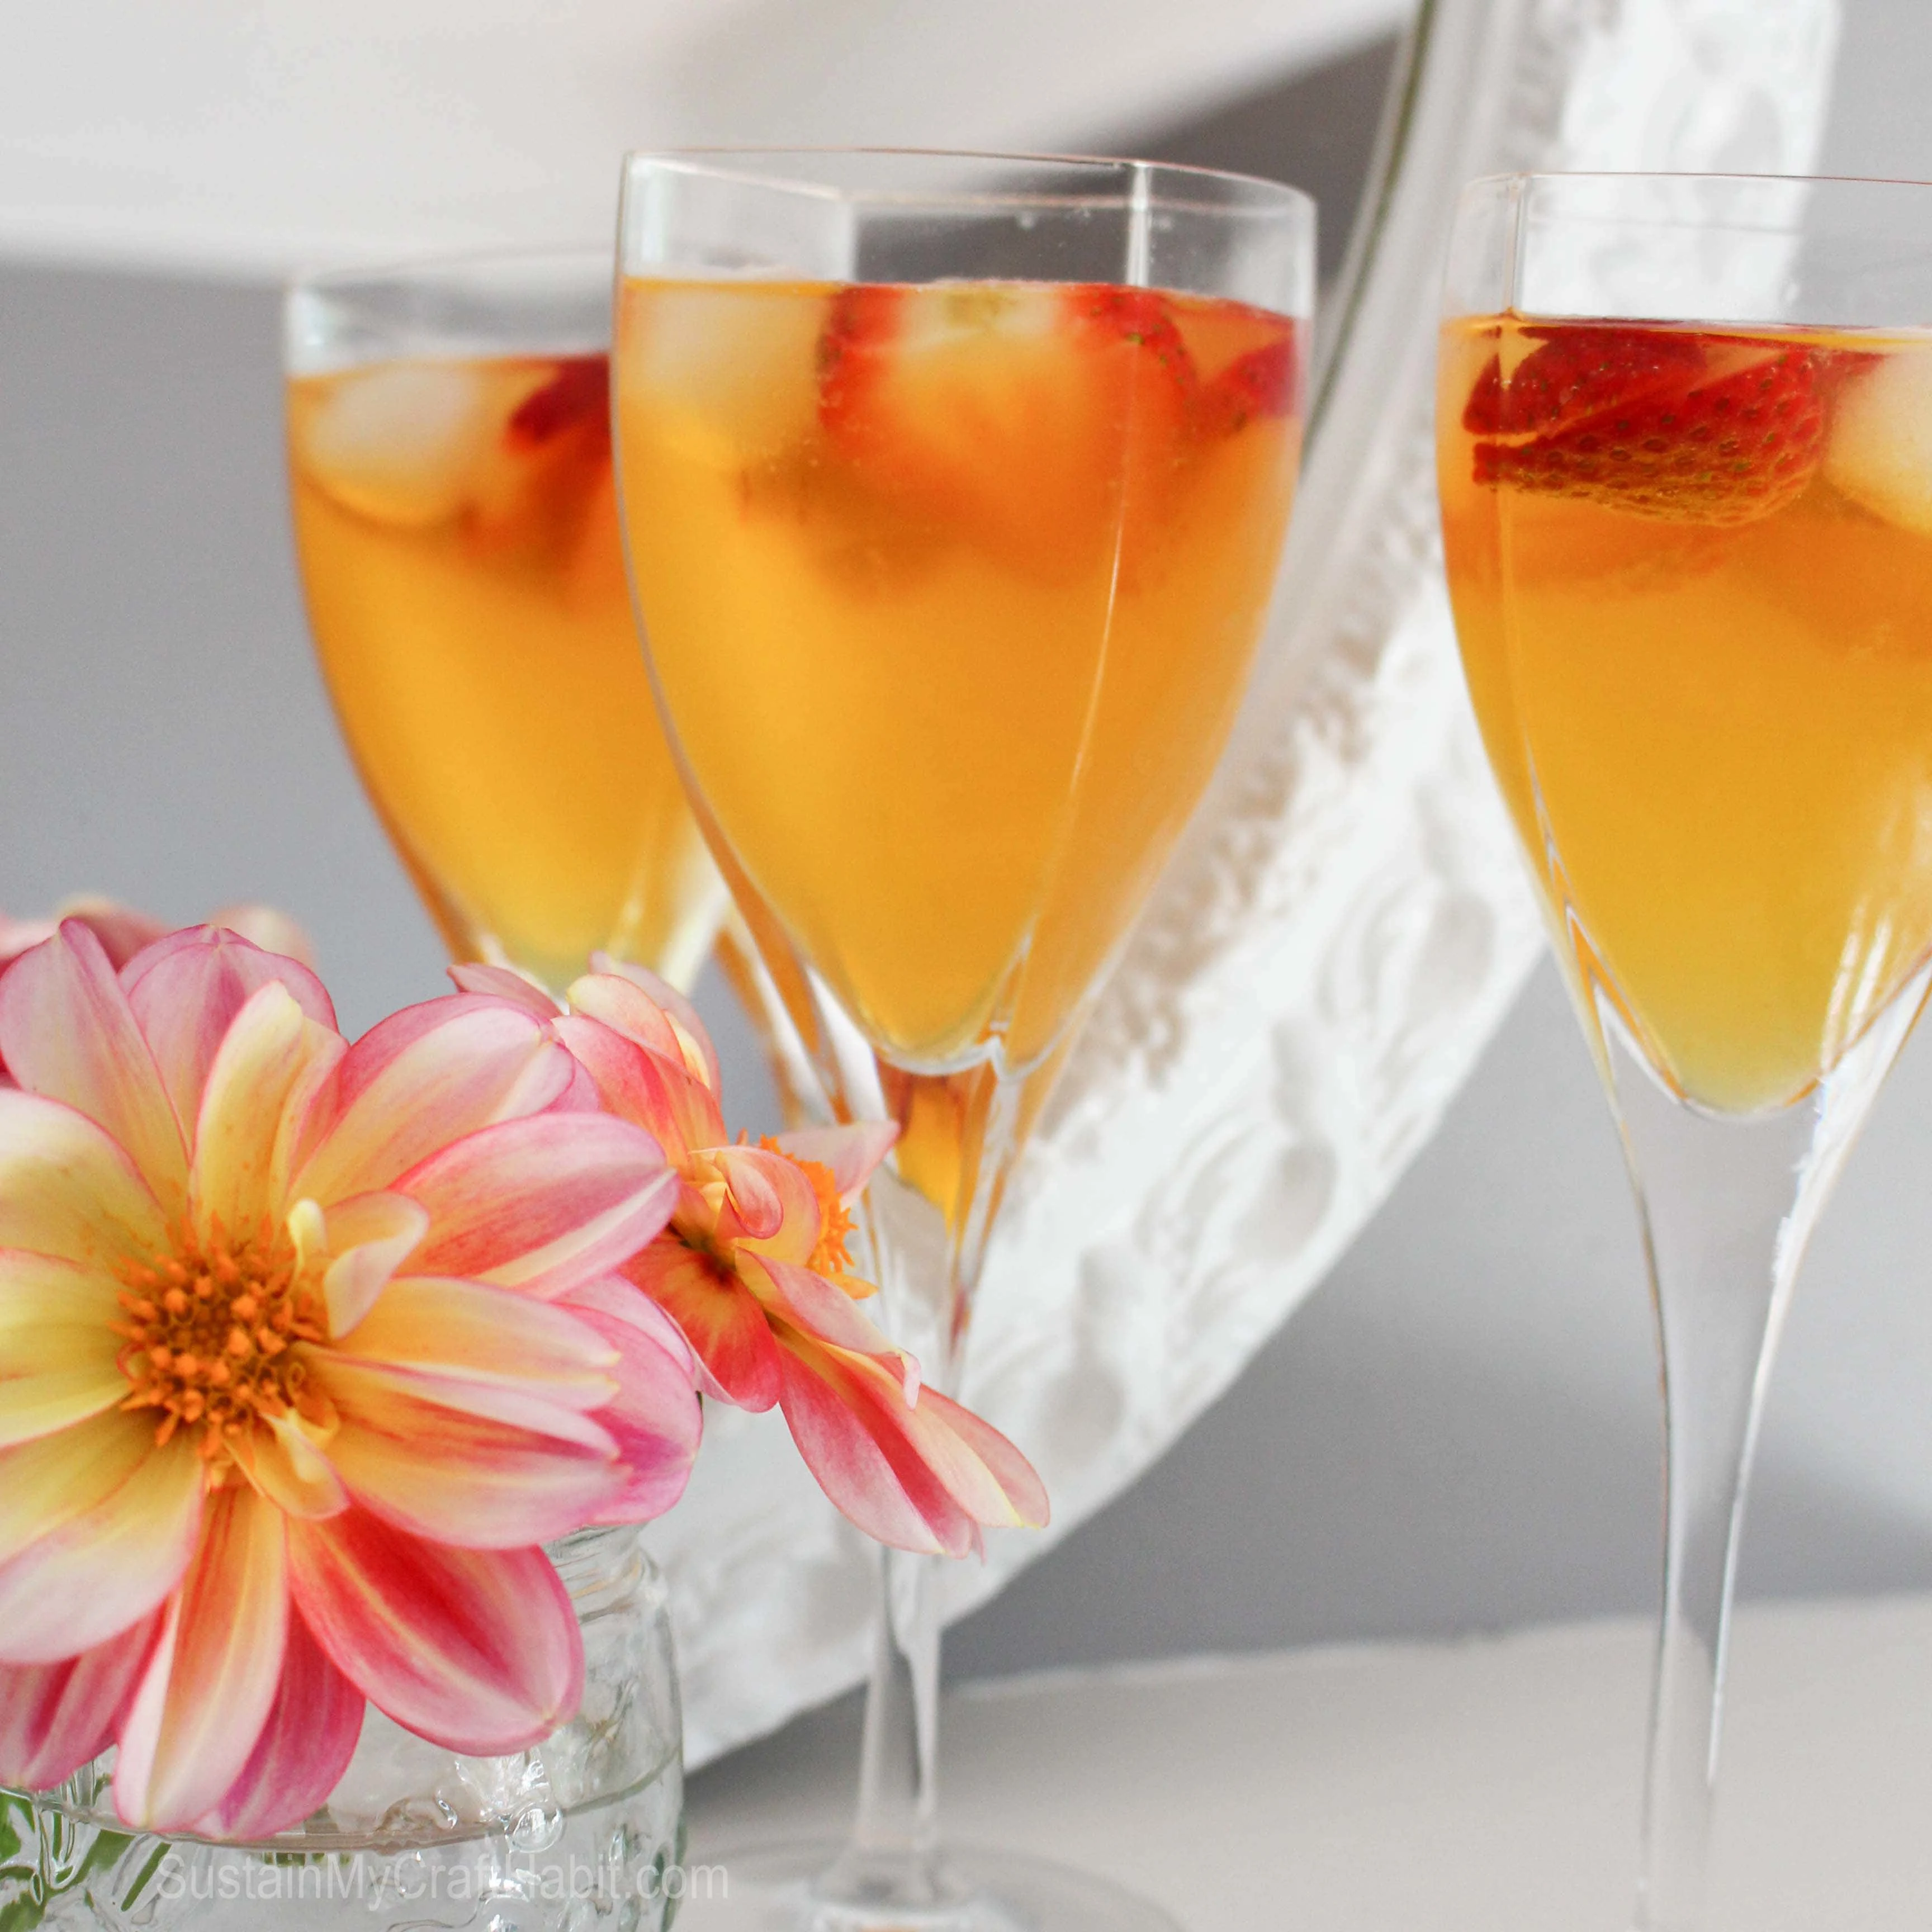 A stemmed wine glass filled with the peach belini and garnished with fresh strawberry slices